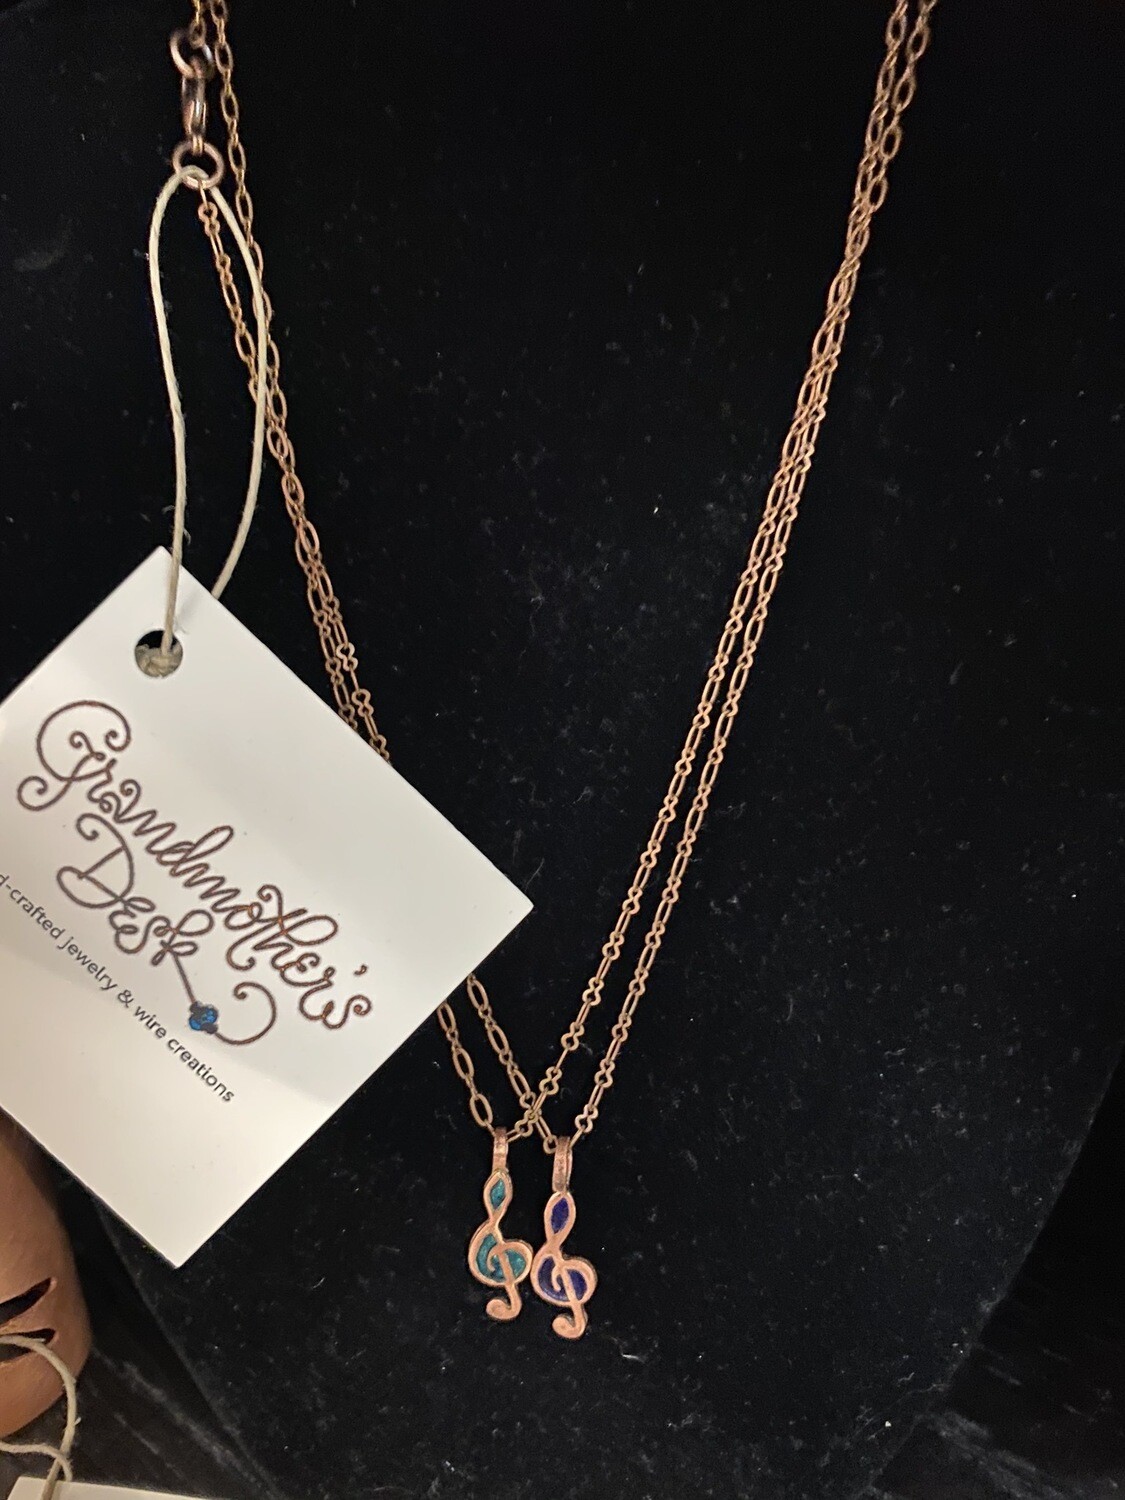 Grandmothers Desk Copper Treble Clef Musical Note Necklace Pink 